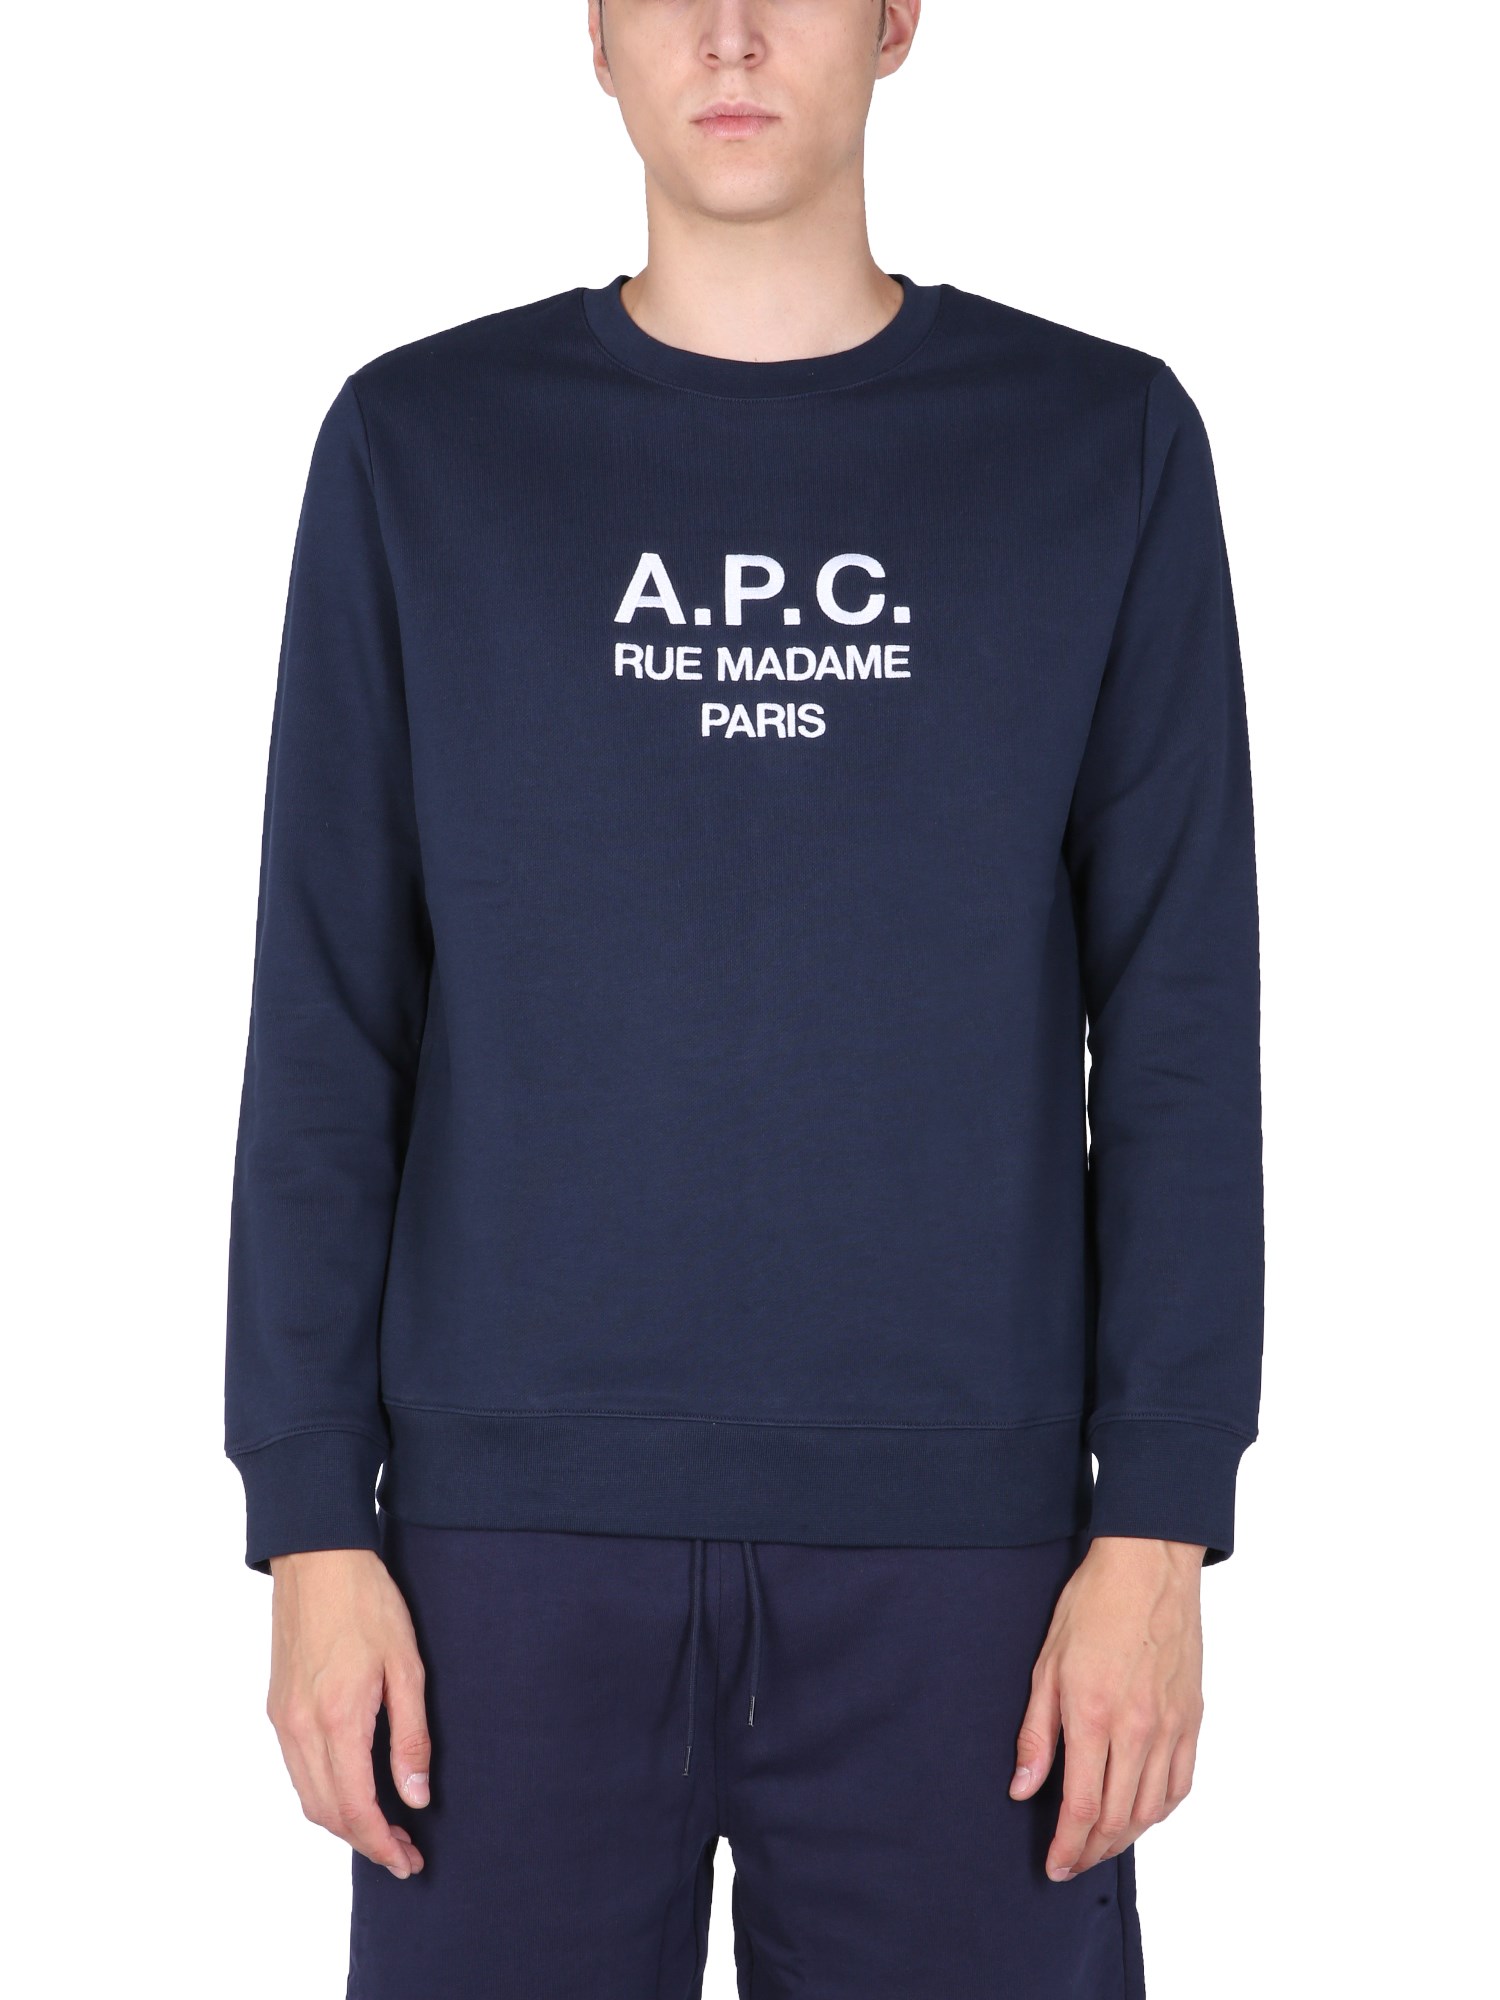 a.p.c. sweatshirt with logo embroidered